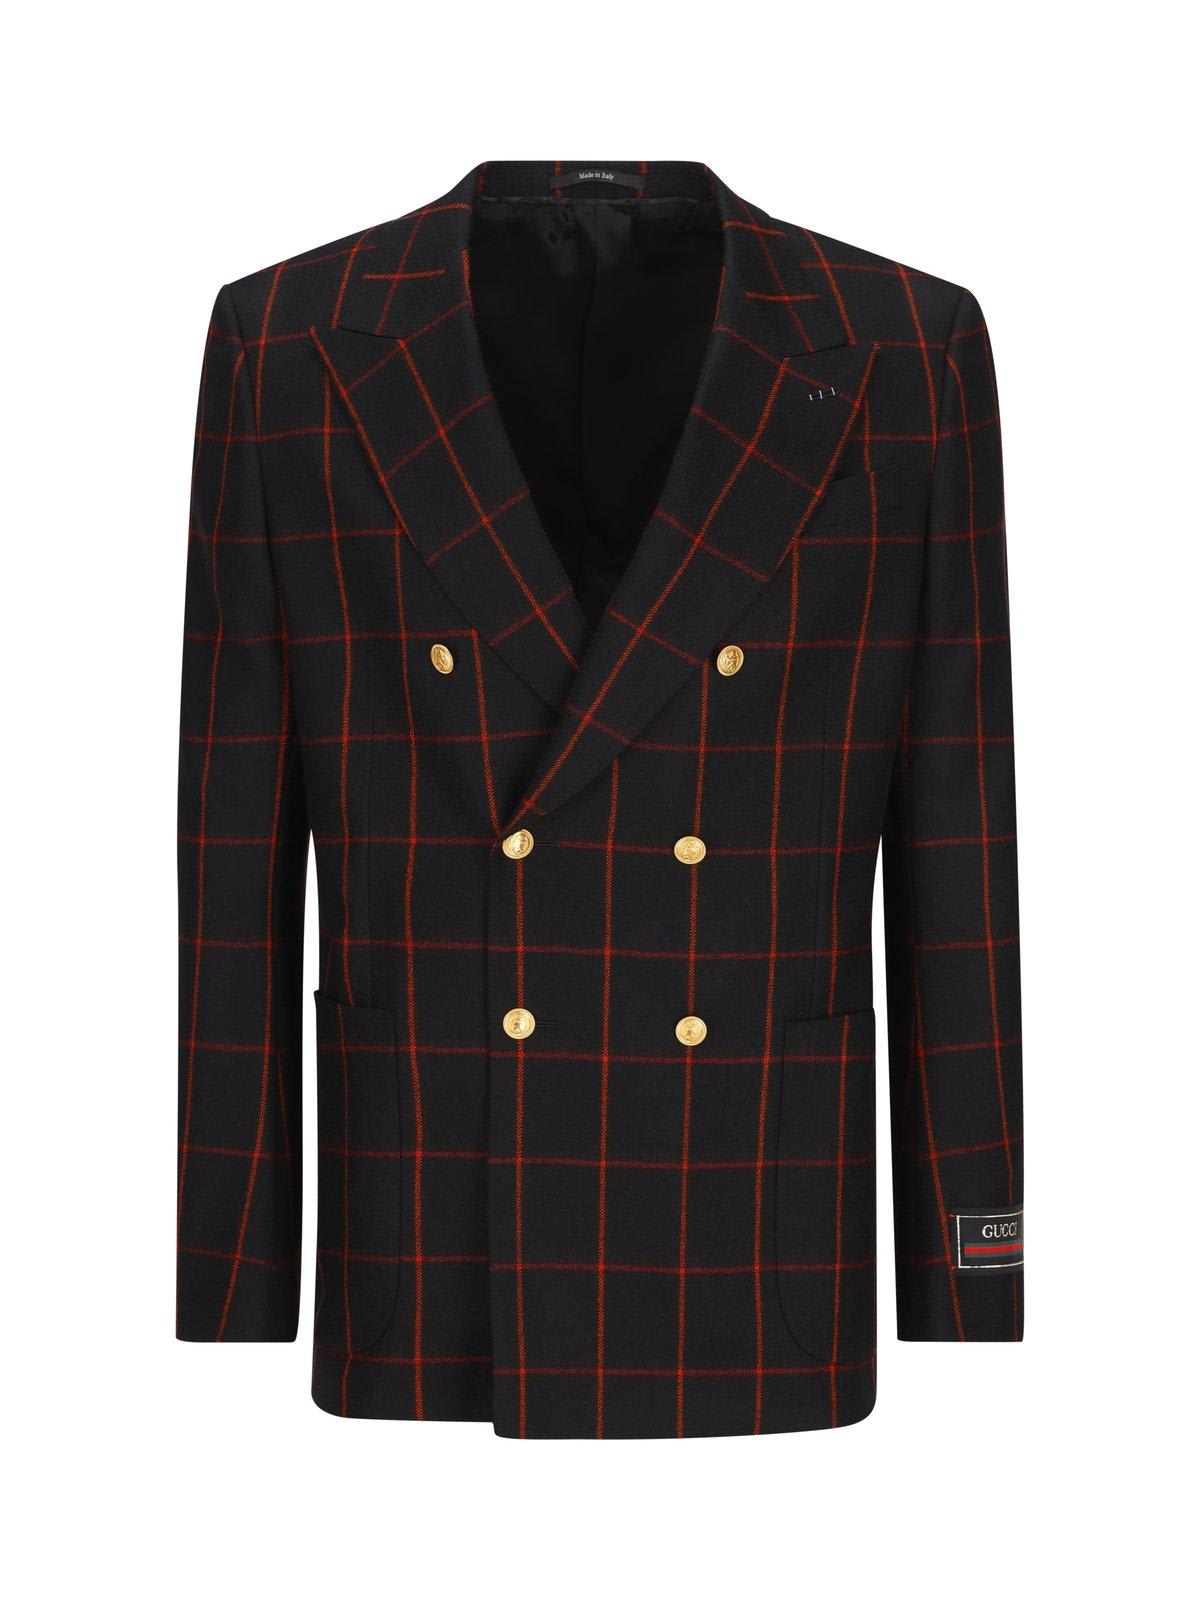 GUCCI CHECKED DOUBLE BREASTED JACKET